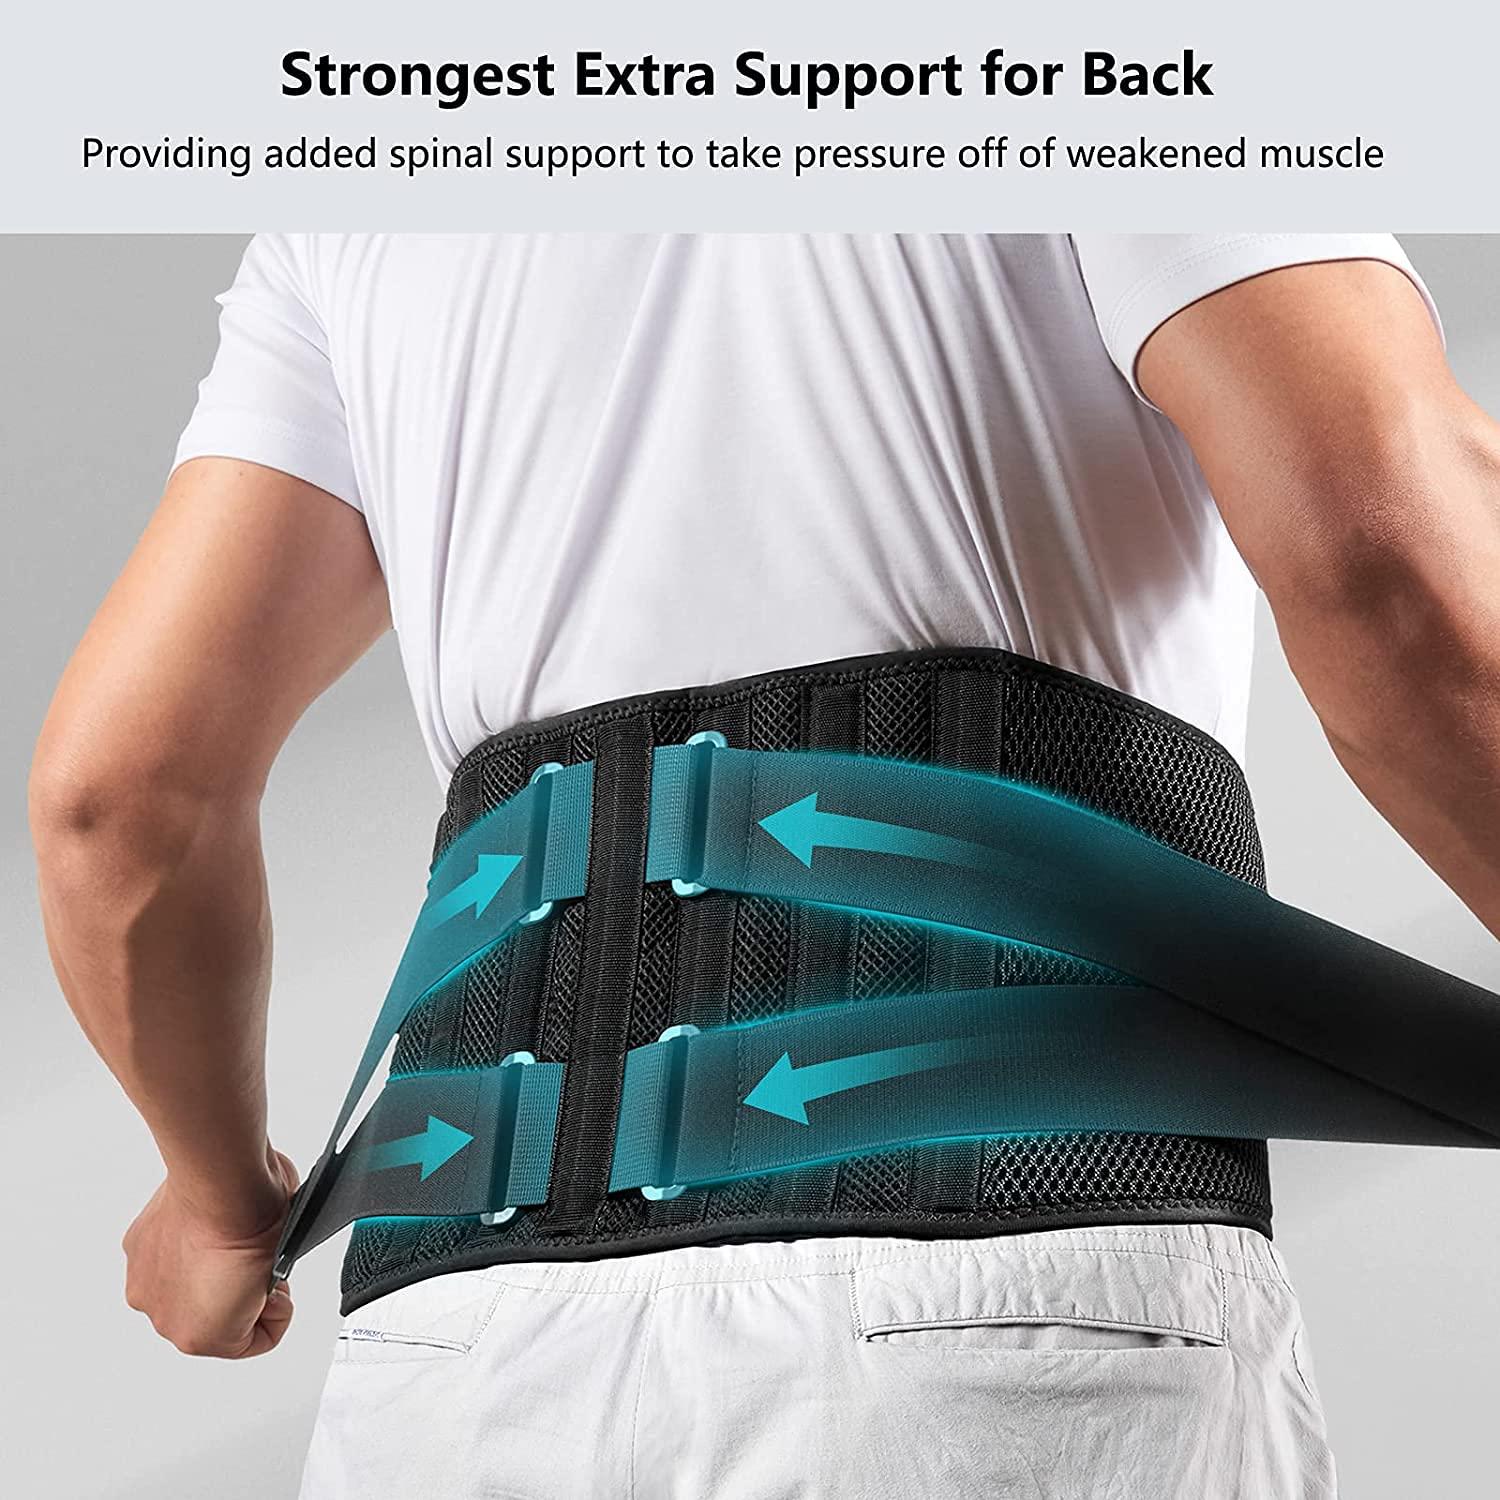 FREETOO Back Braces for Lower Back Pain Relief with 6 Stays, Breathable  Back Support Belt for Men/Women for work , Anti-skid lumbar support belt  with